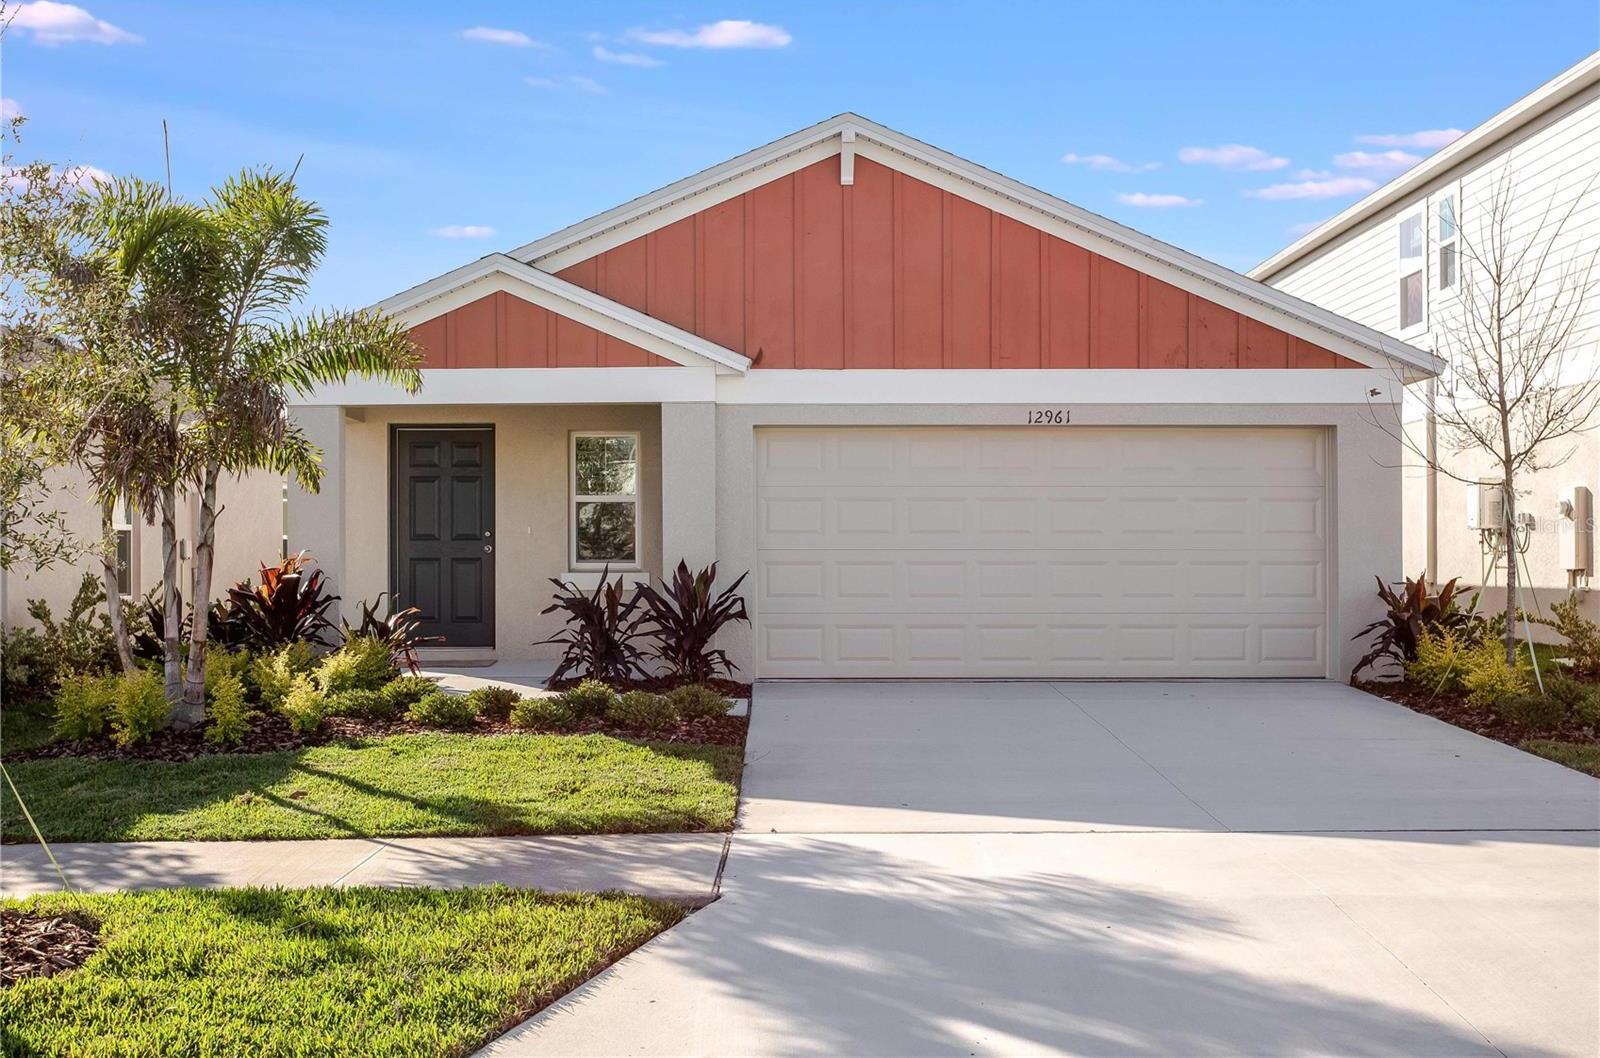 Photo one of 14480 Meadow Bird Ave Lithia FL 33547 | MLS T3510107